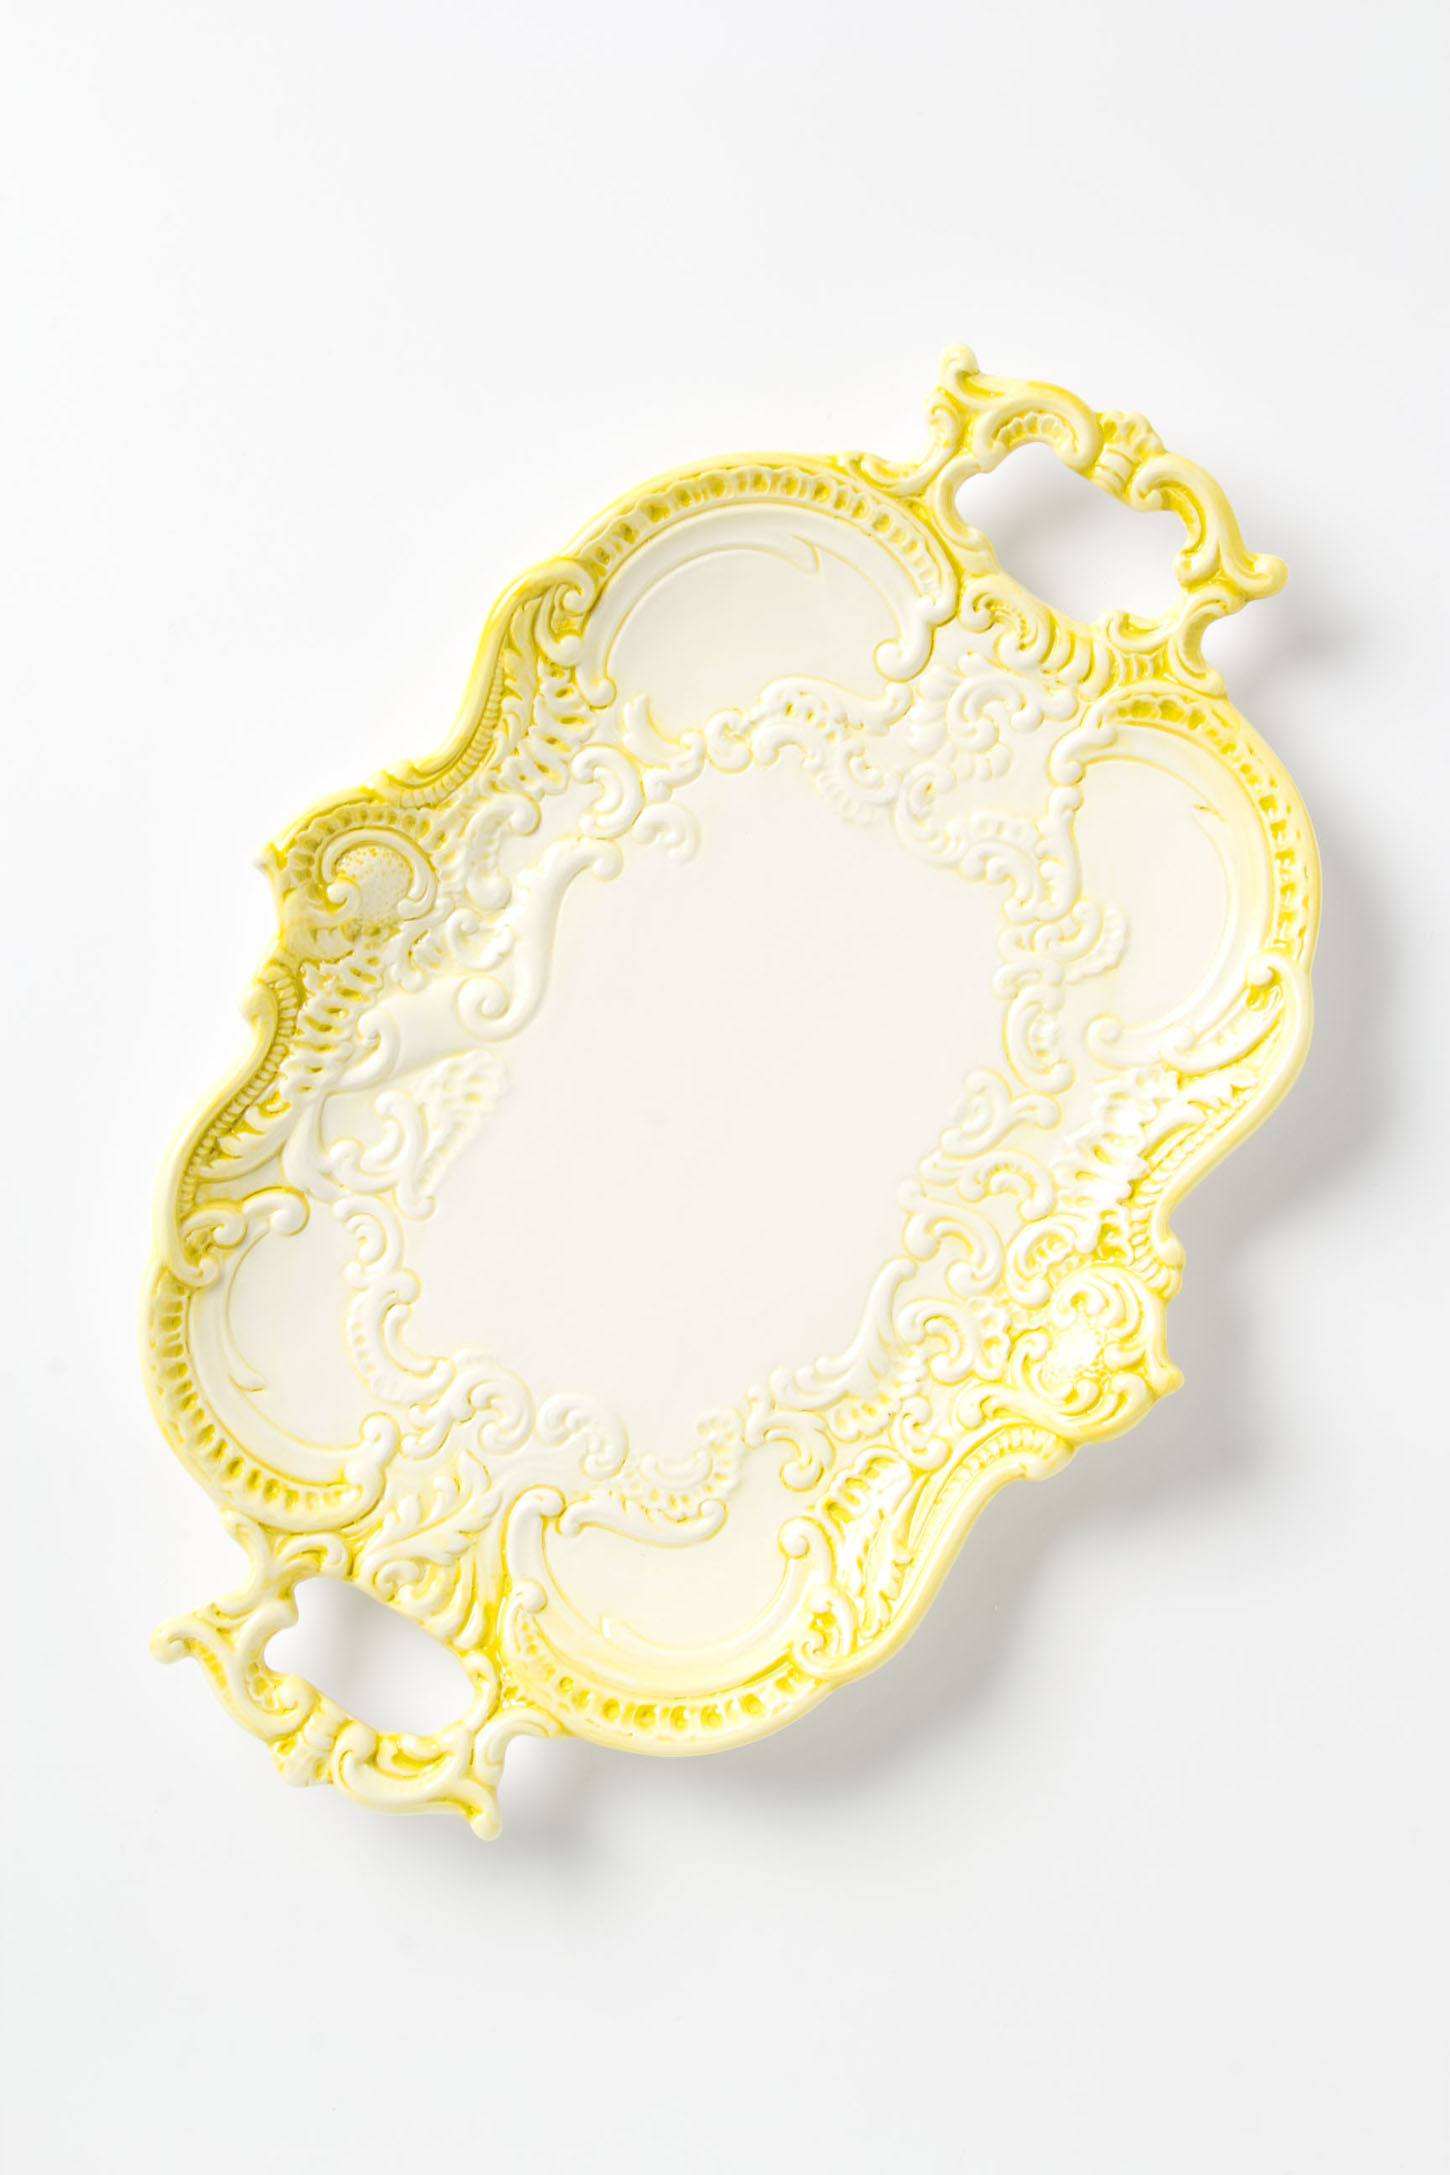 Patterned yellow and white serving platter